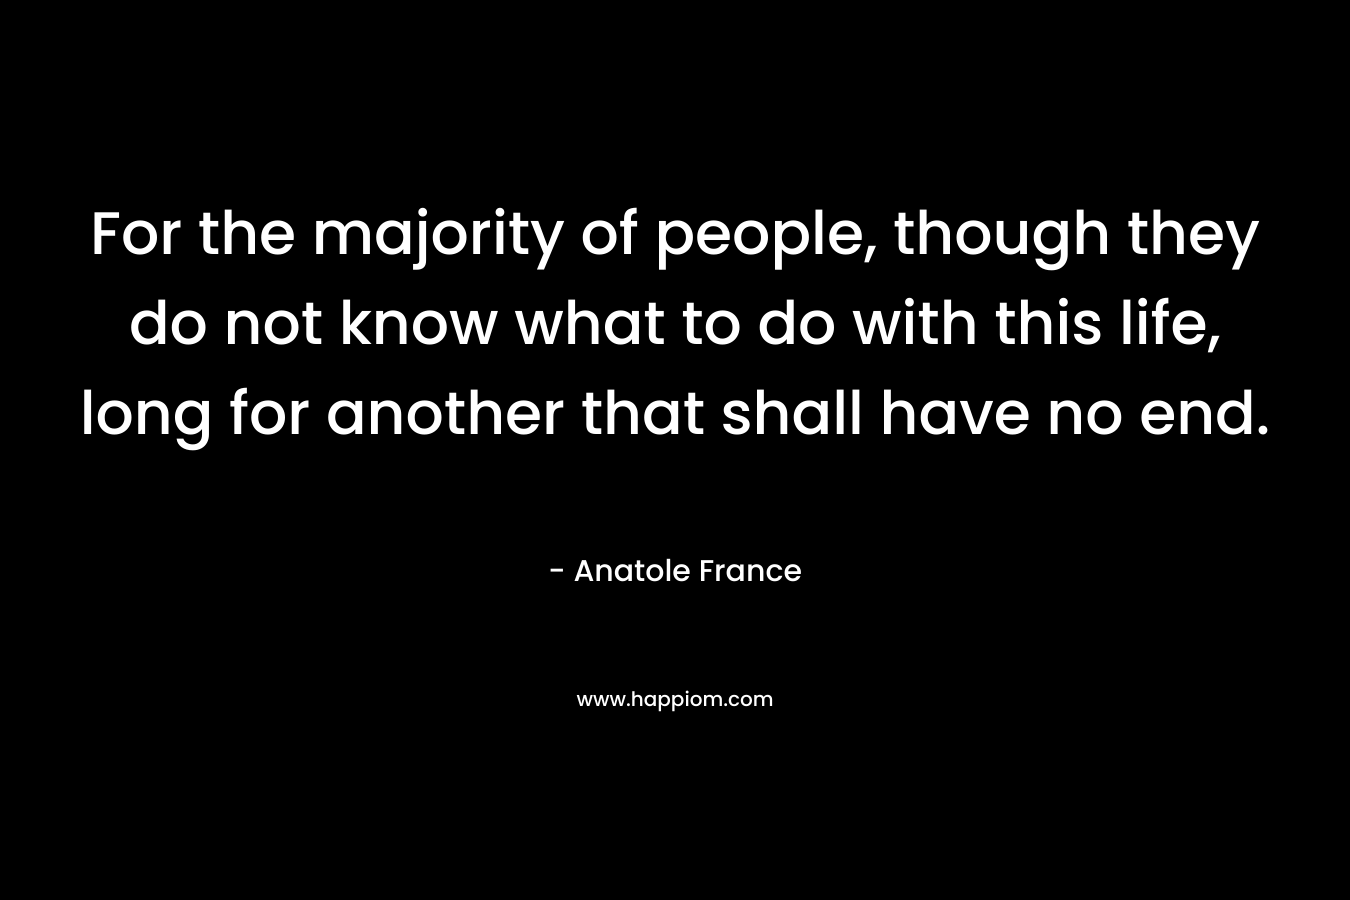 For the majority of people, though they do not know what to do with this life, long for another that shall have no end. – Anatole France